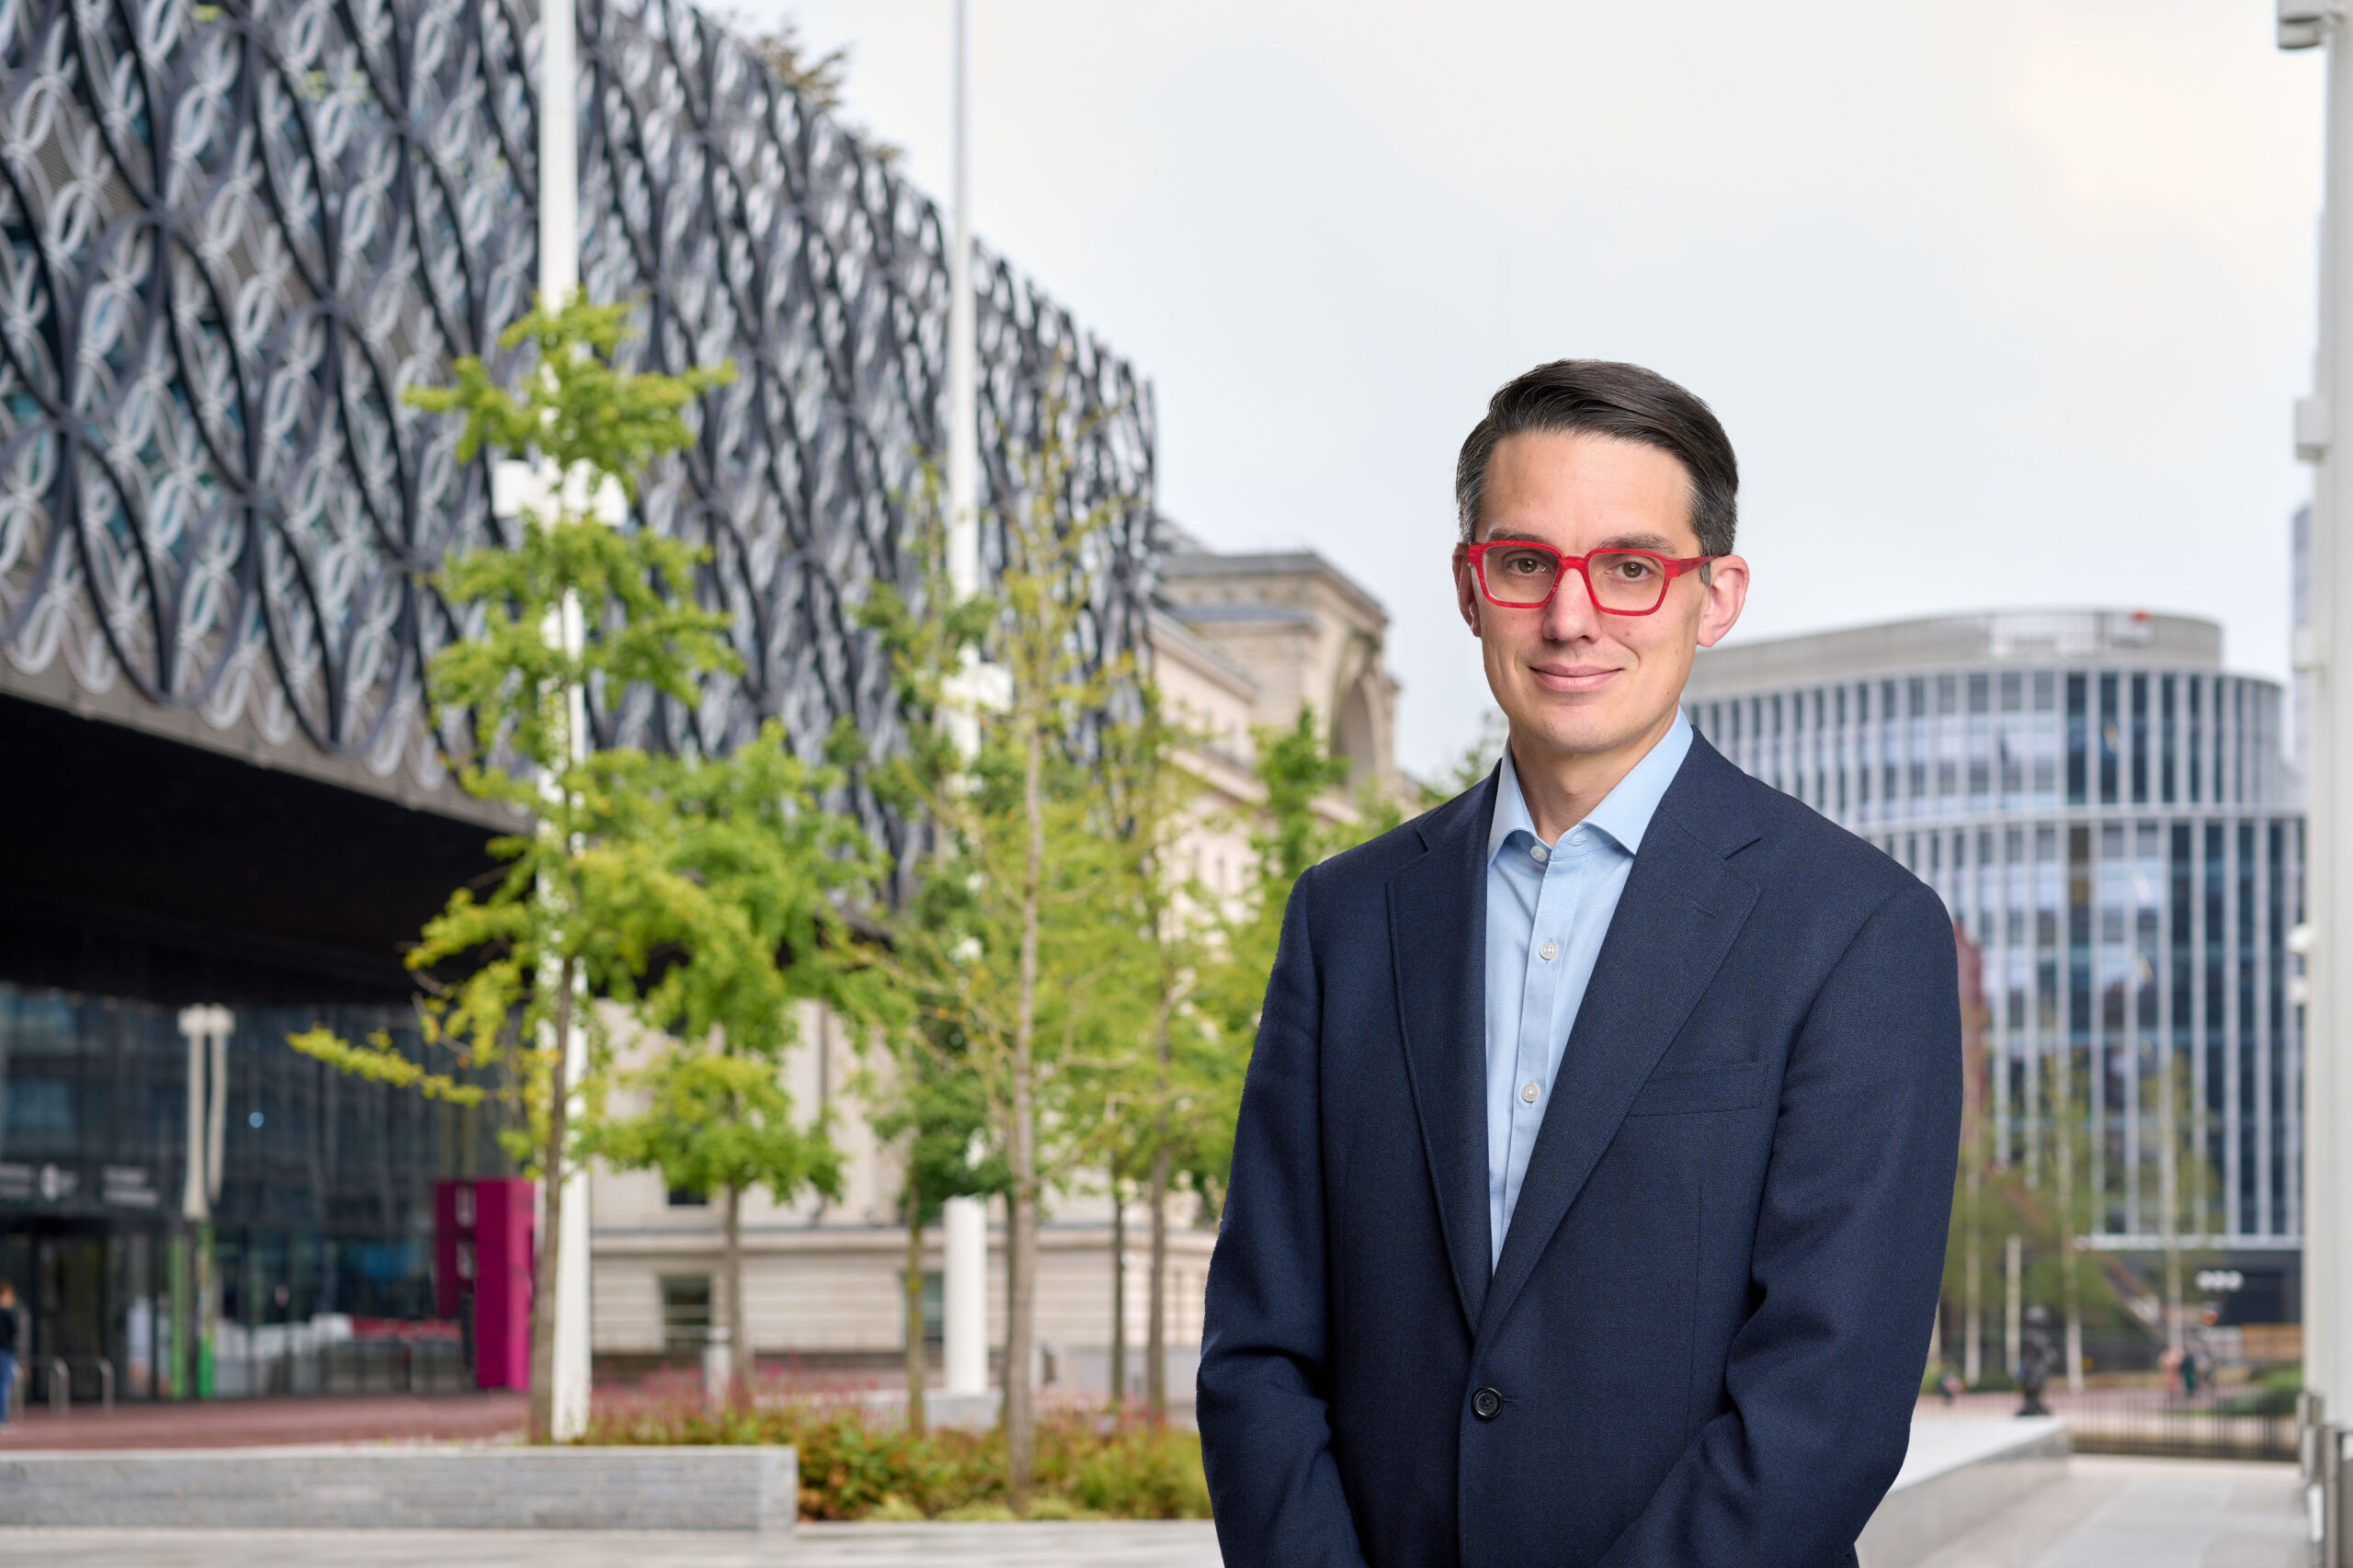 A man in a light blue shirt and suit jacket in front of some trees and buildings in central Birmingham.